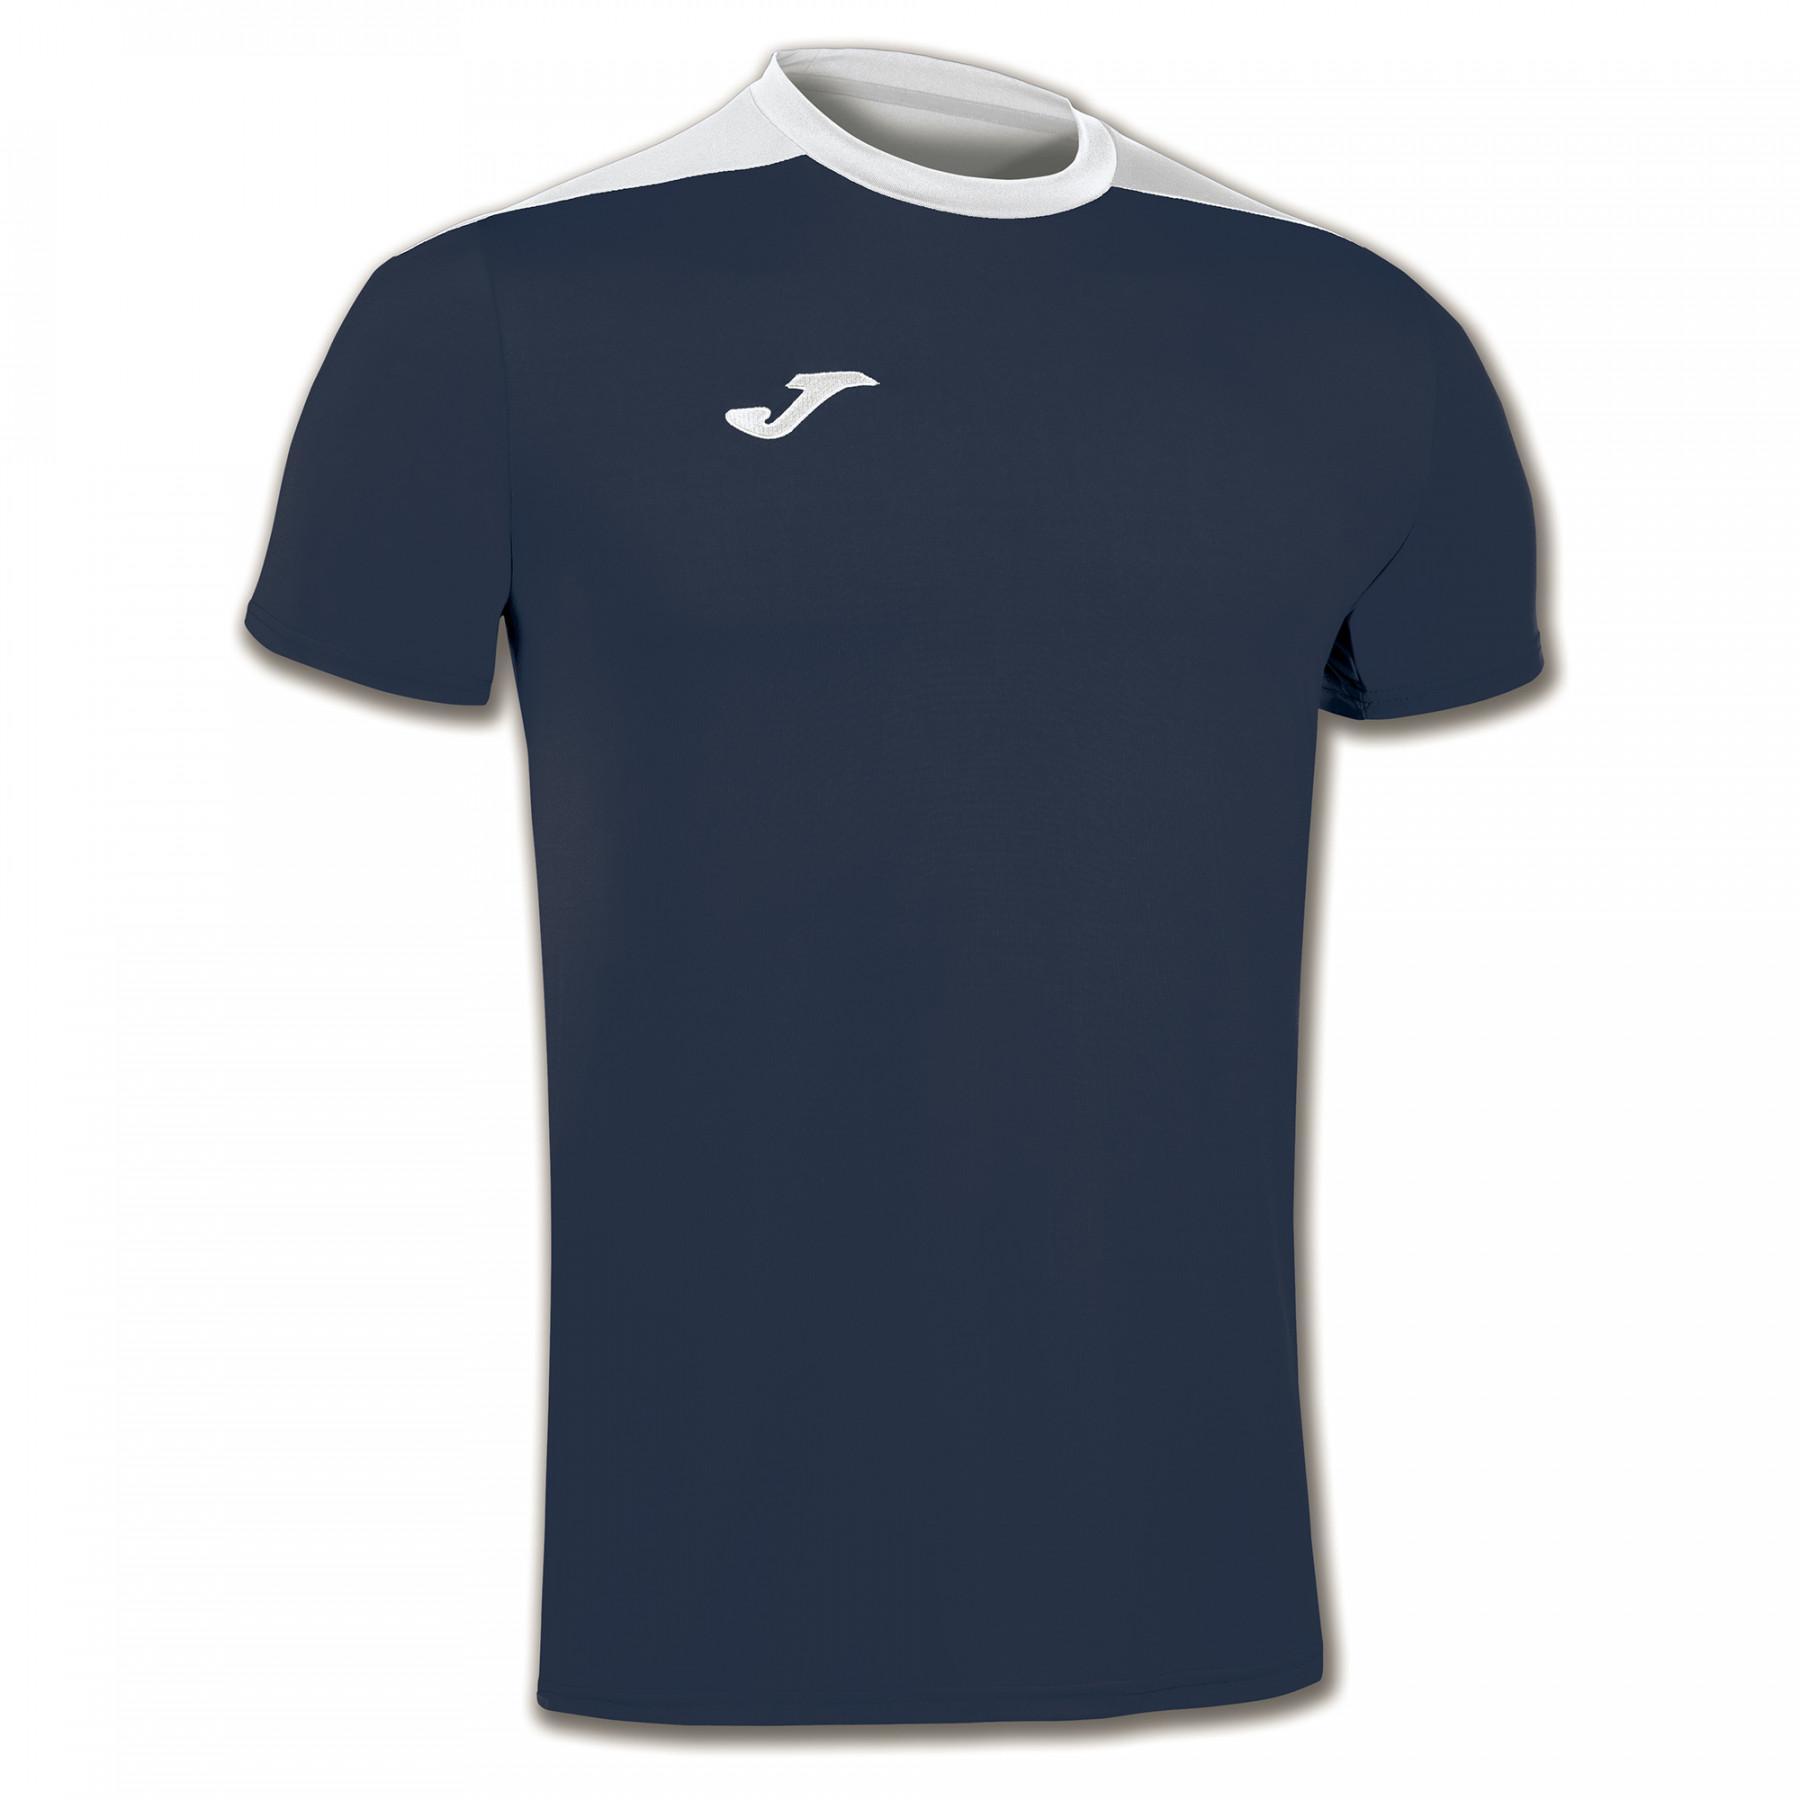 Maillot Joma Spike